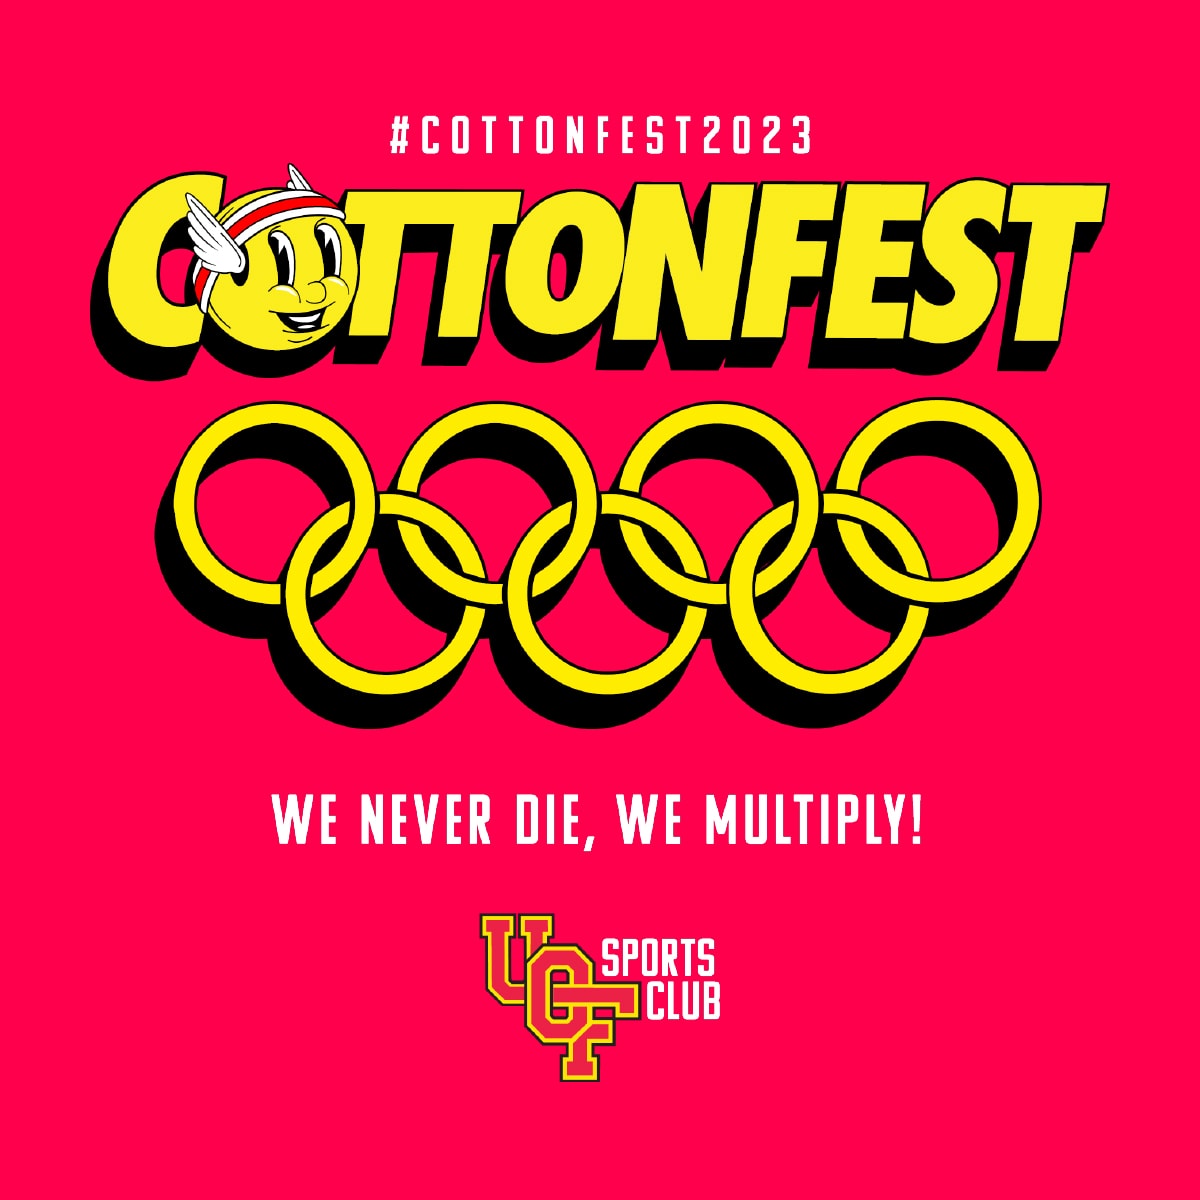 Get in touch Cottonfest